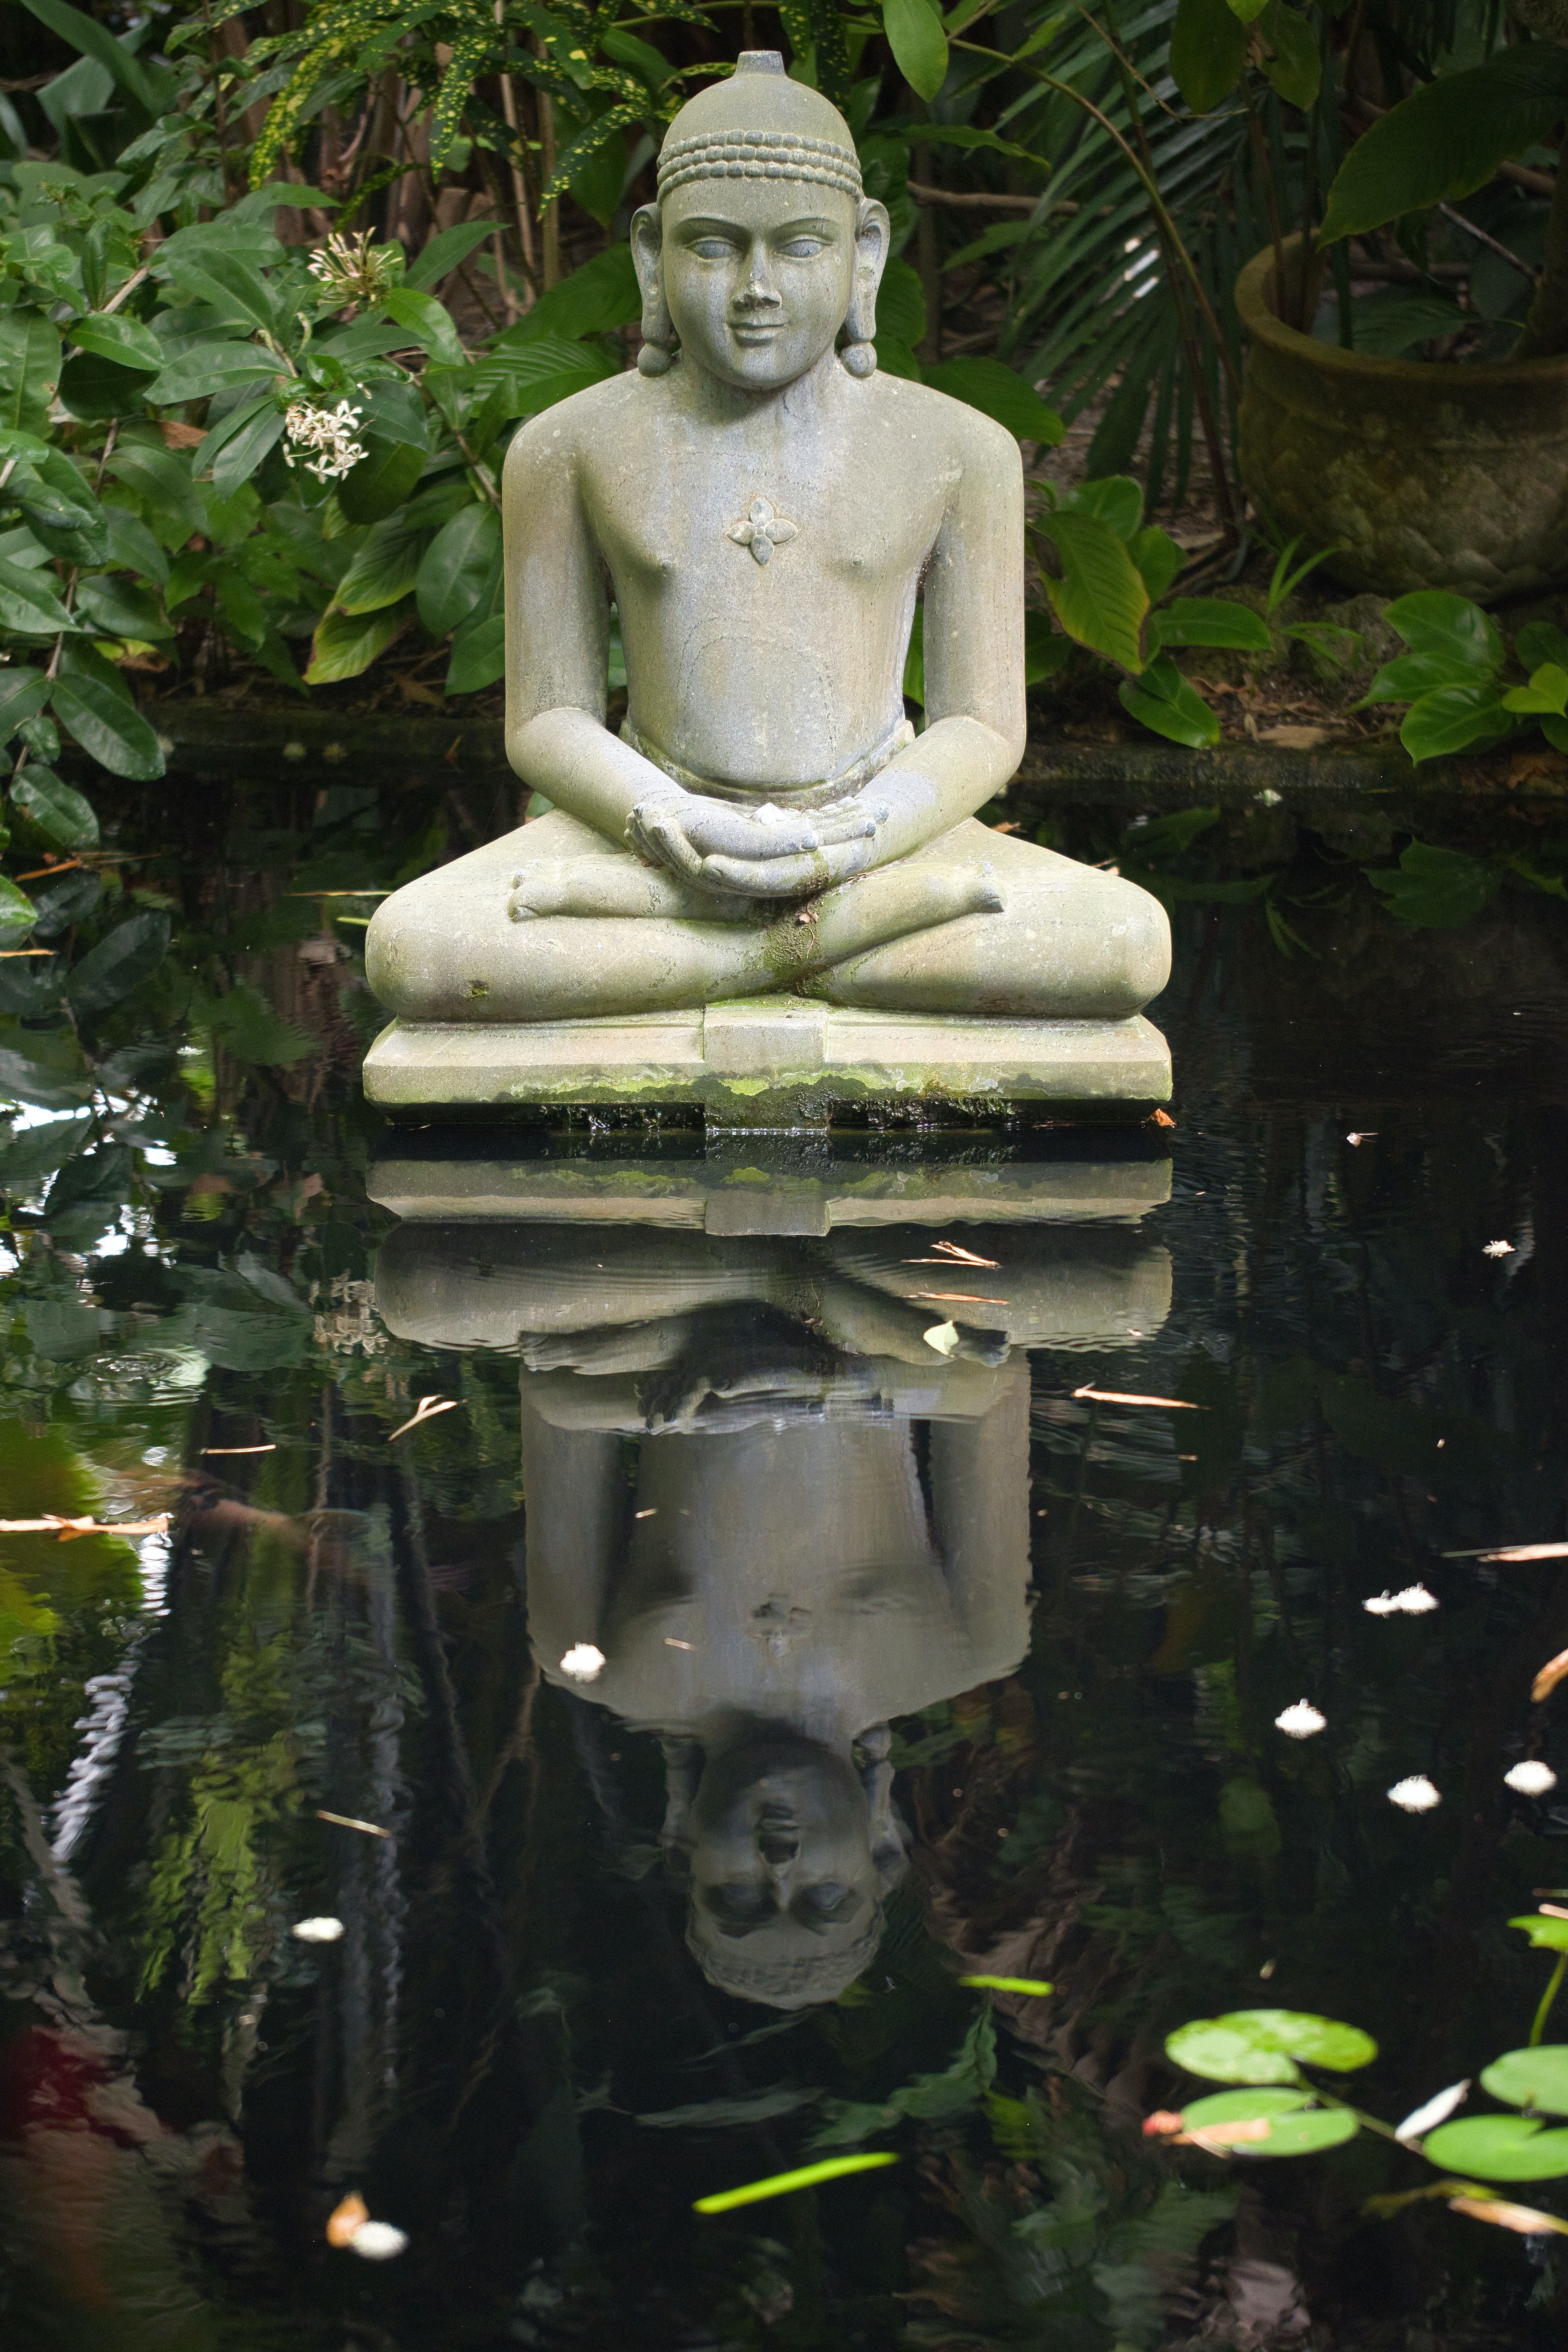 Stone Buddha statue in Marie Selby Botanical Gardens, Florida 